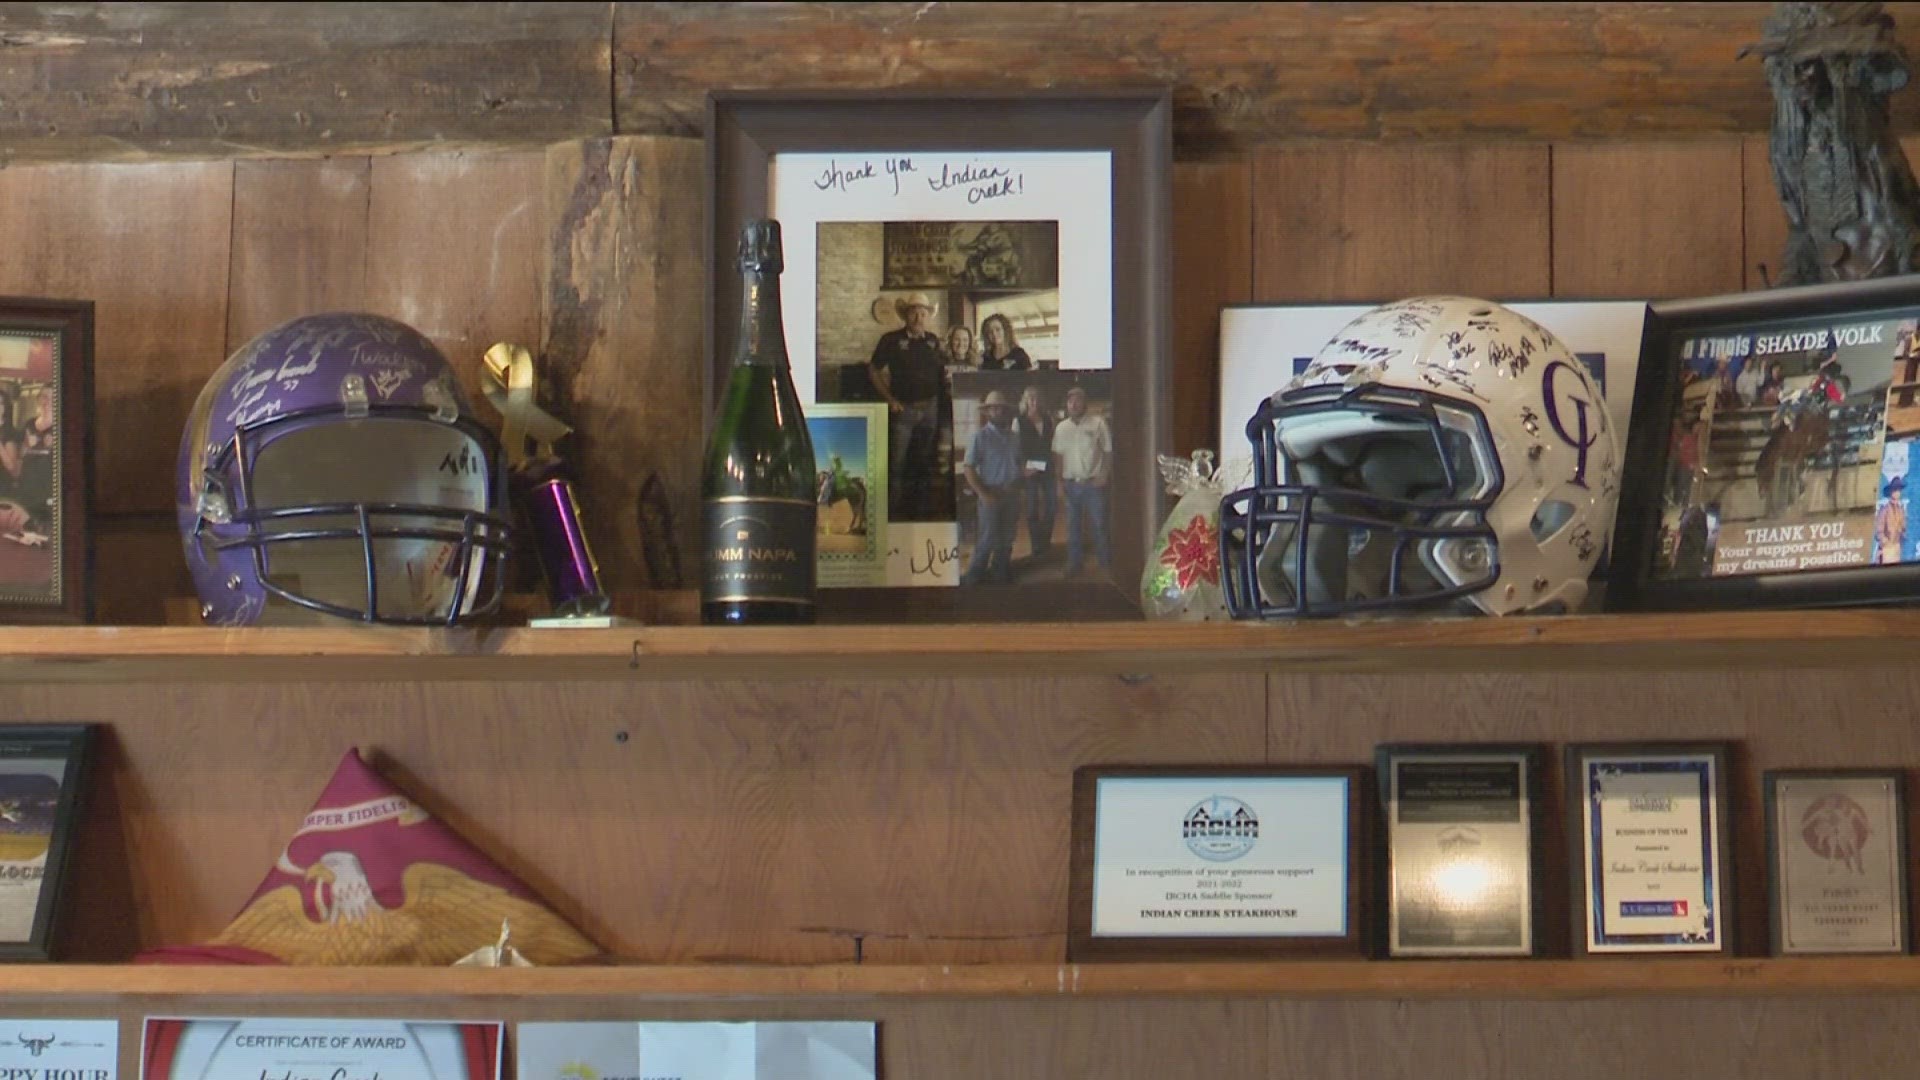 The item is back on display at Indian Creek Steakhouse. It joins a new Yotes helmet signed by the current football team after the gold one was stolen.